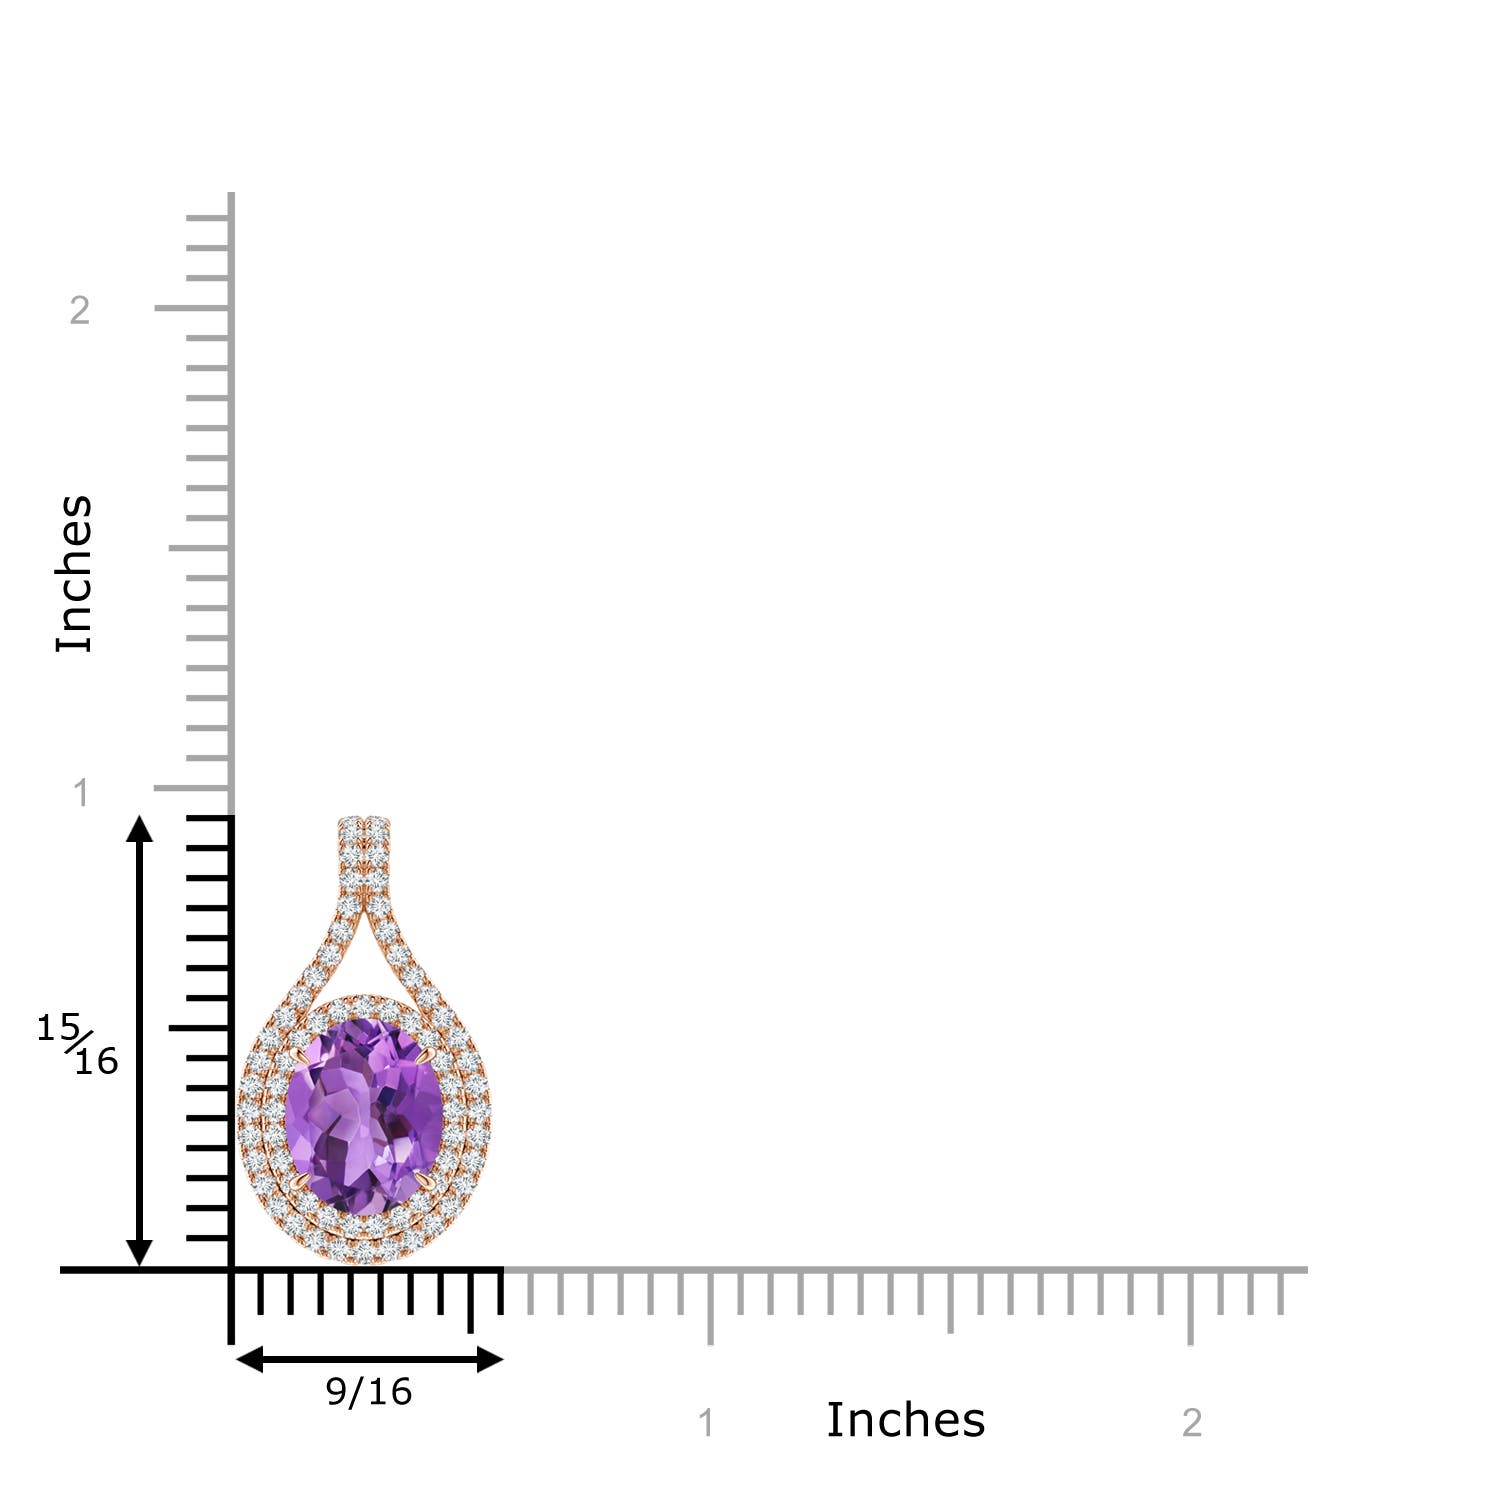 AA - Amethyst / 2.75 CT / 14 KT Rose Gold